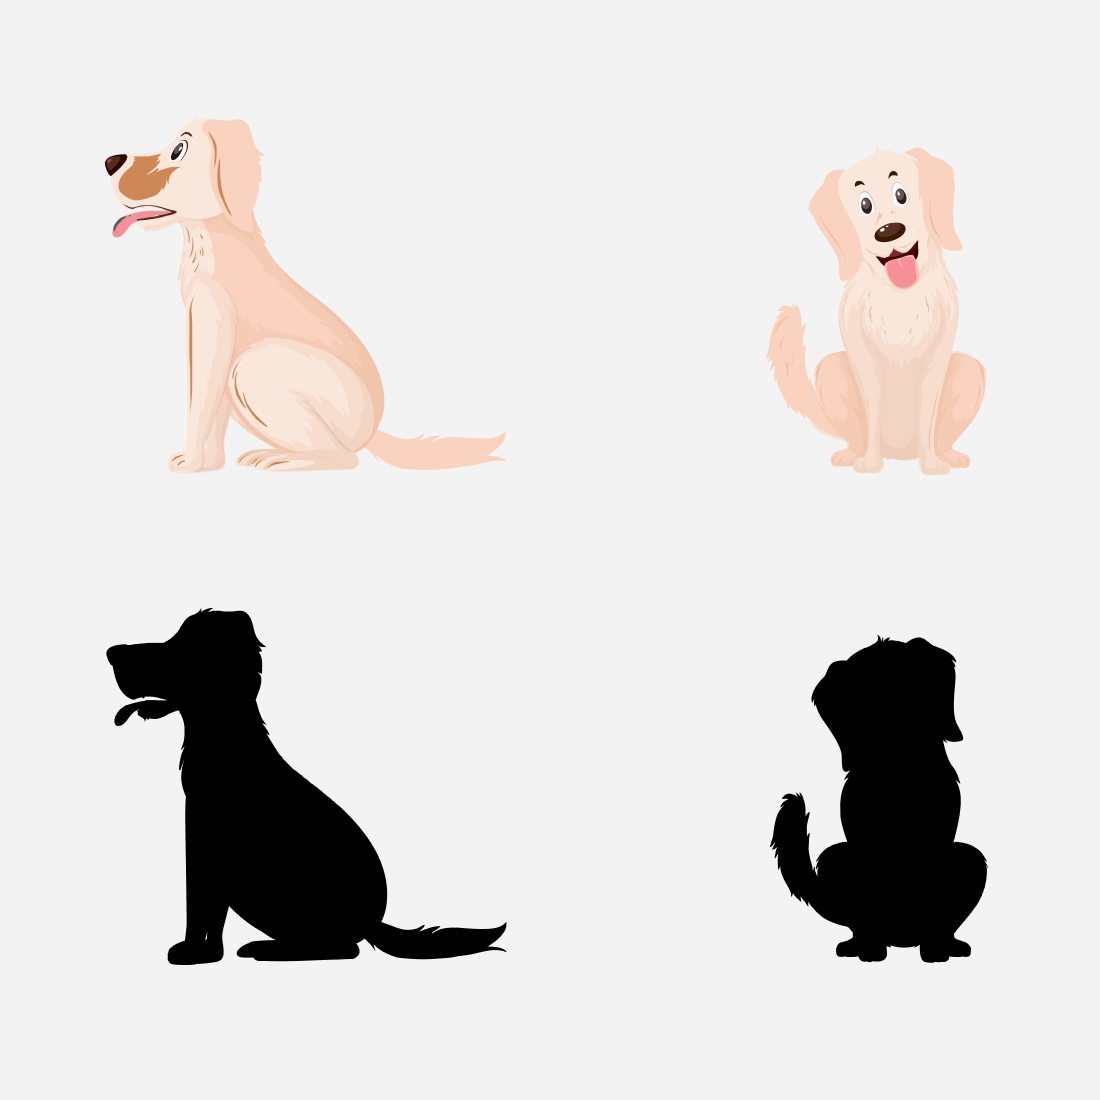 Image of a golden retriever from different sides on a light gray background.